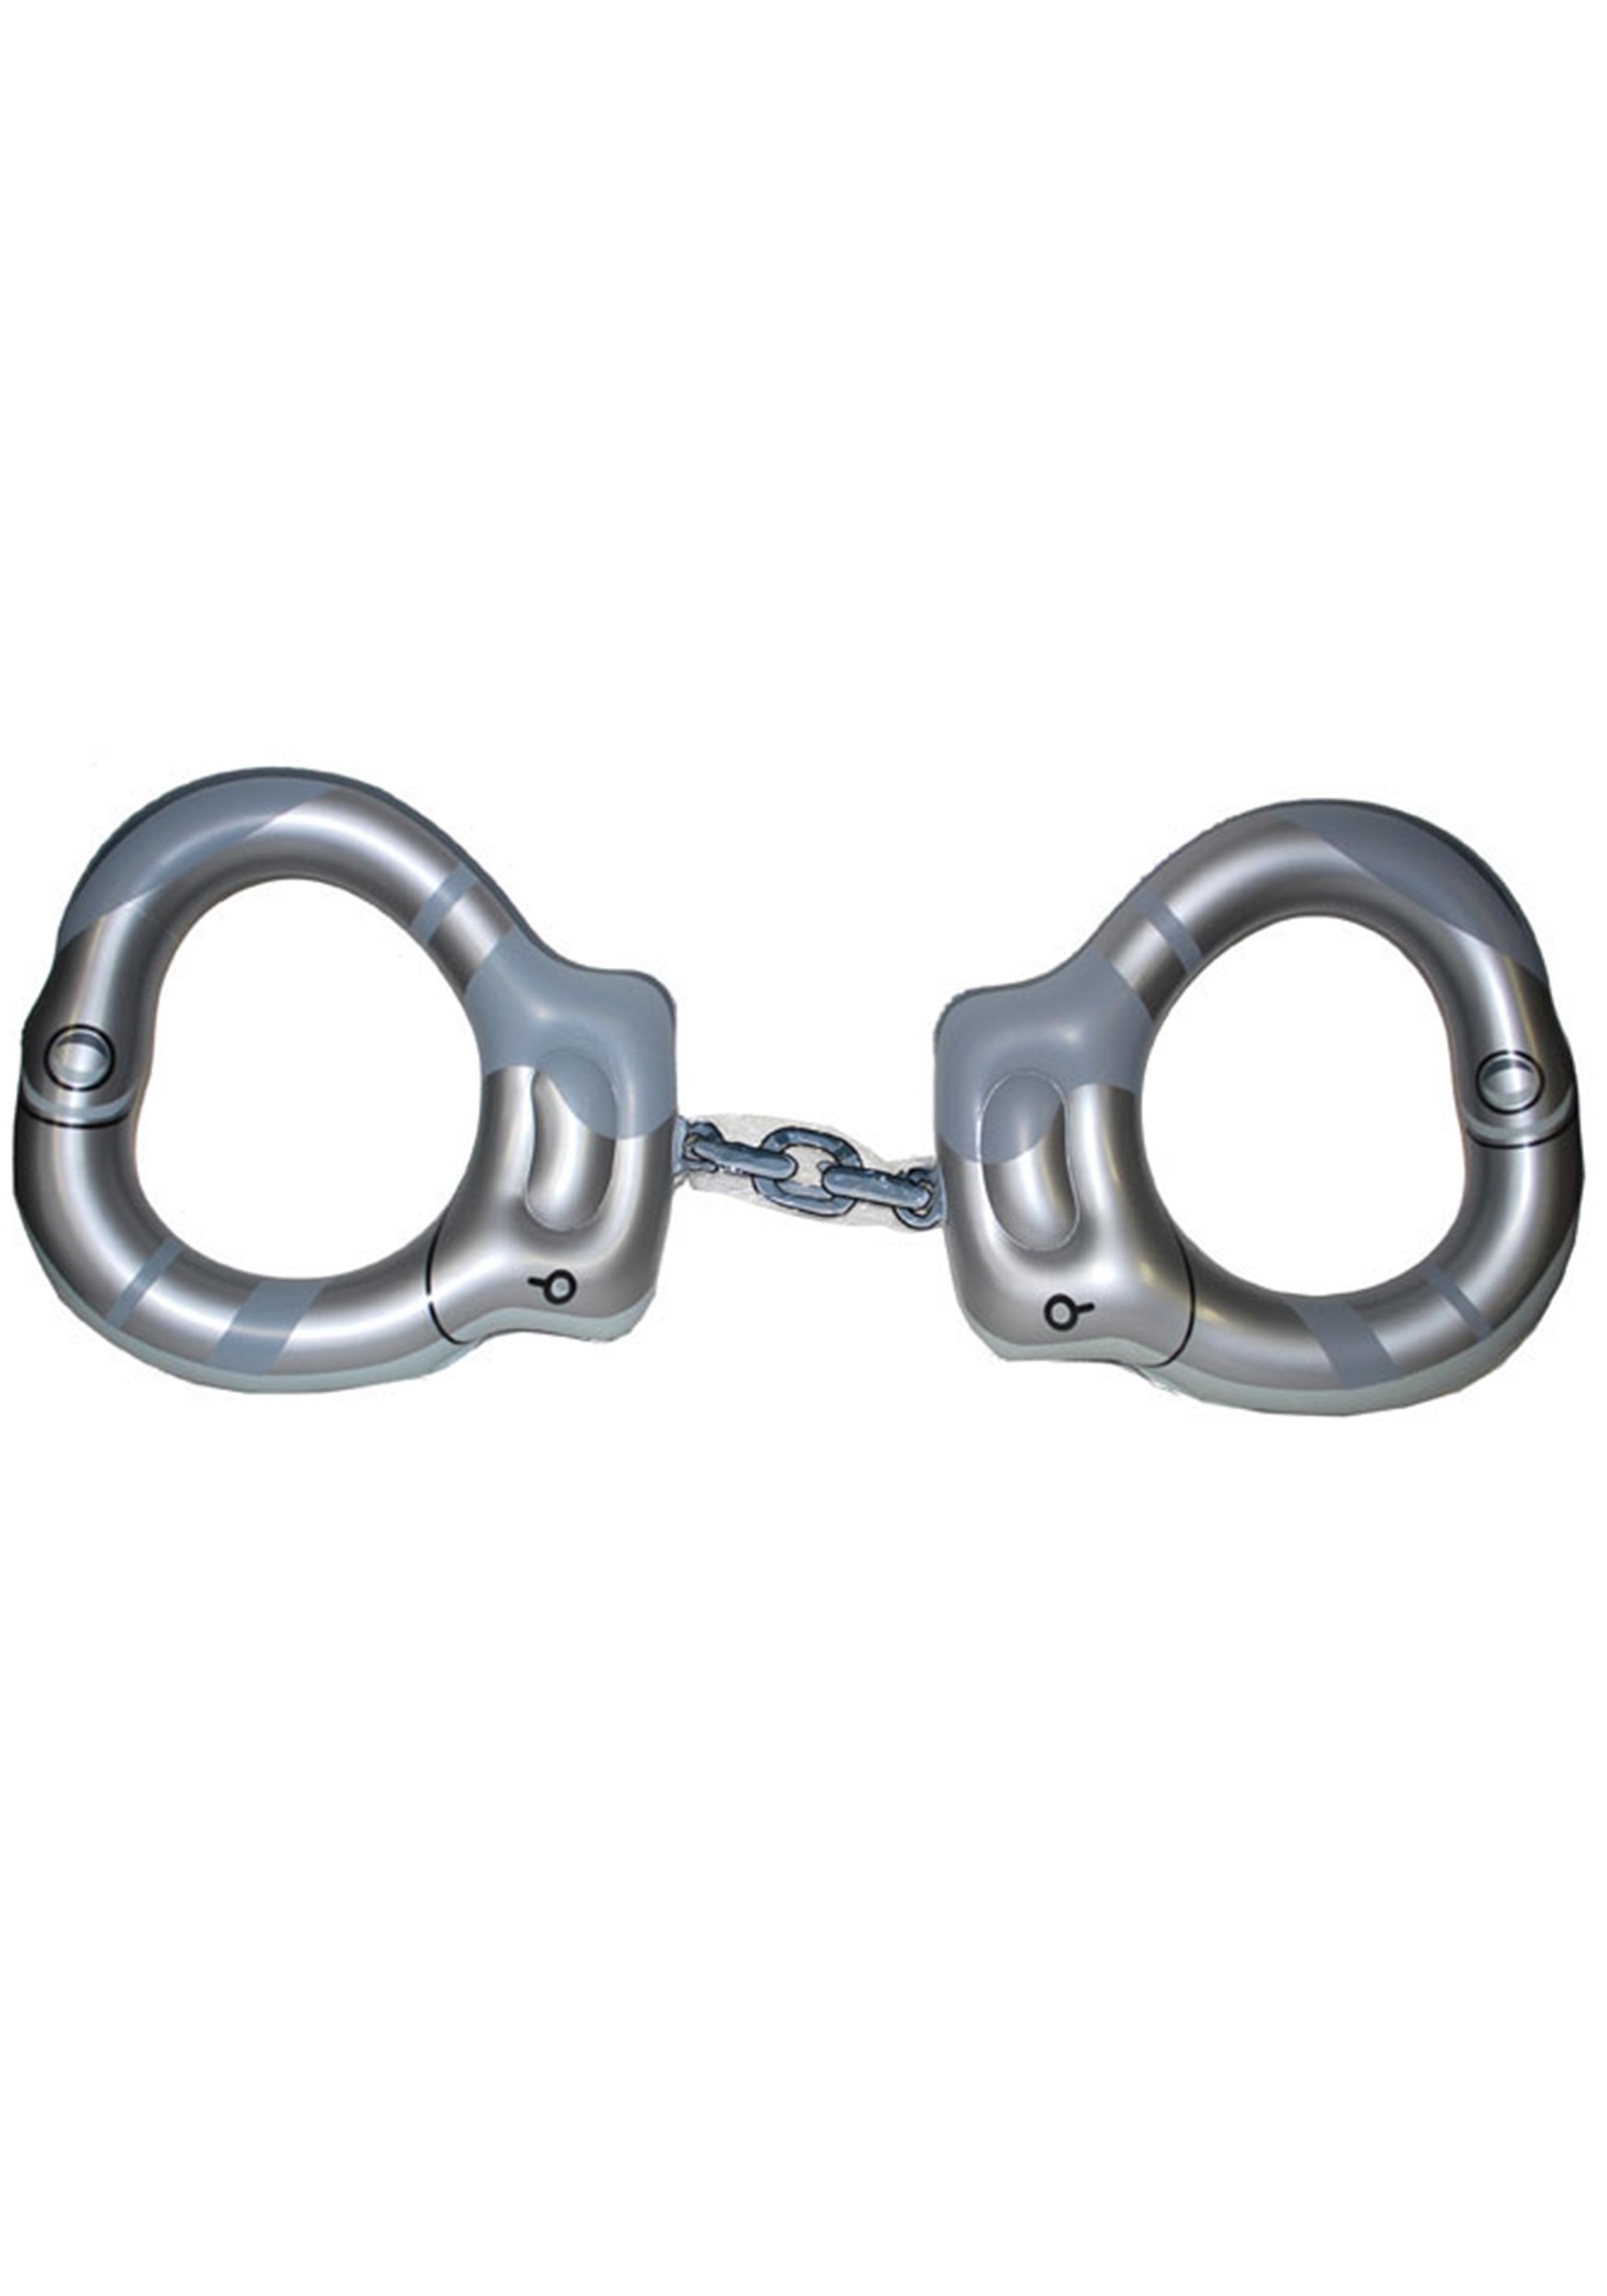 The Inflatable Handcuffs